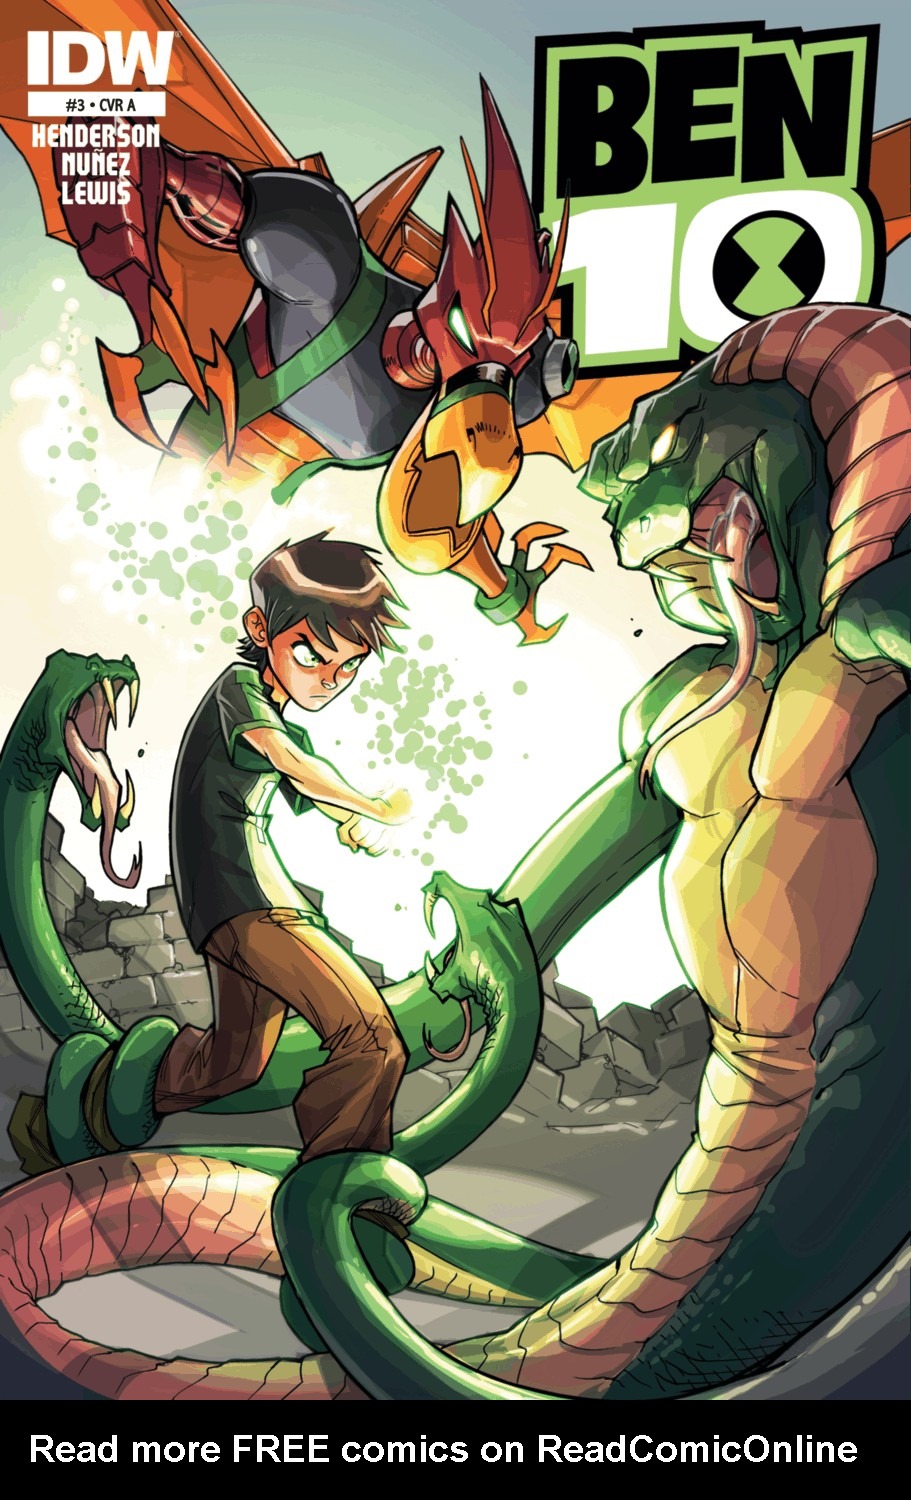 Ben 10 Gay Porn - Ben 10 Issue 3 | Read Ben 10 Issue 3 comic online in high quality. Read  Full Comic online for free - Read comics online in high quality .| READ  COMIC ONLINE